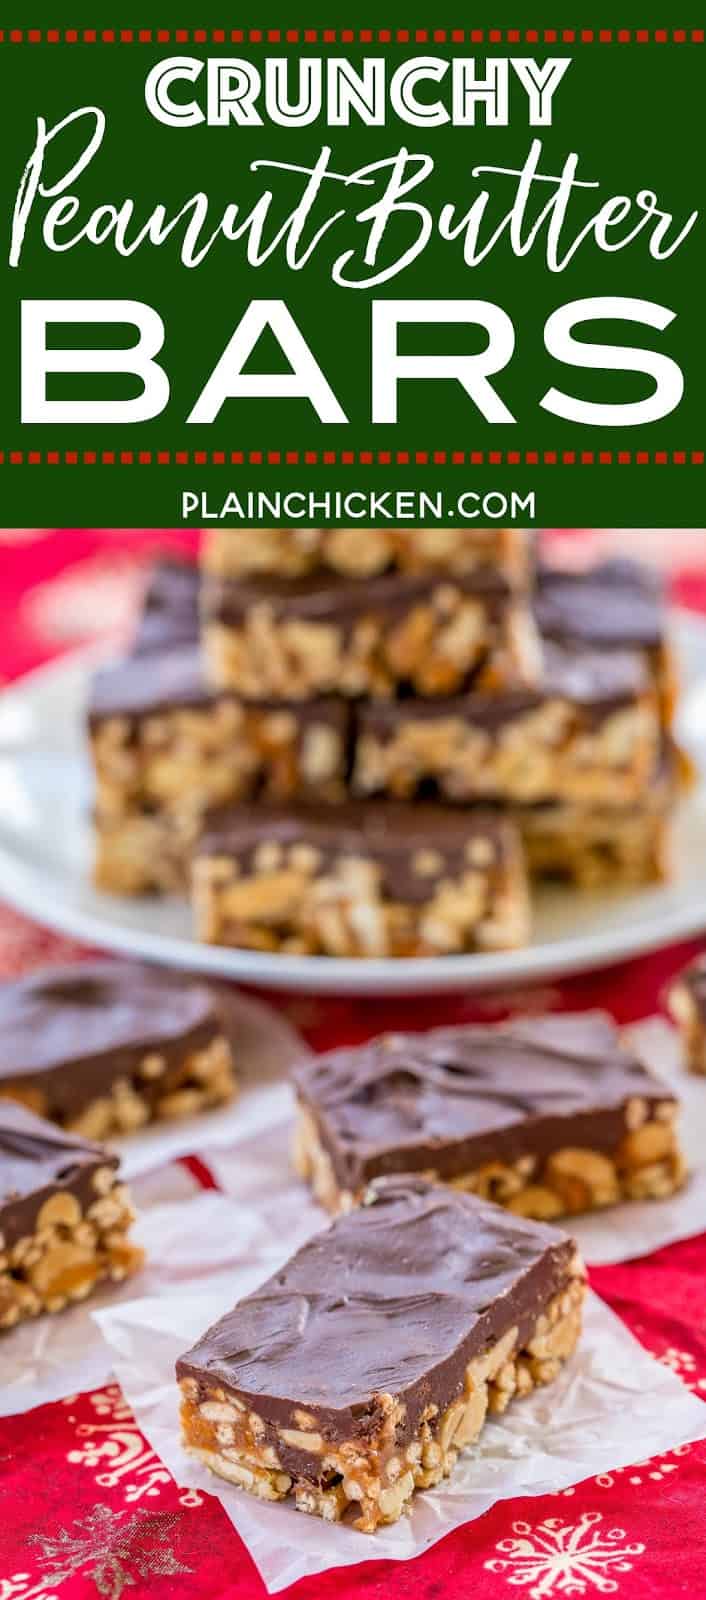 Crunchy Peanut Butter Bars recipe - NO-BAKE treat!!! Chow mein noodles, peanuts, butterfingers, peanut butter, corn syrup, sugar,  and chocolate. These things fly off the plate! Great for parties, cookie exchanges or a homemade gift!! #dessert #nobaketreats #peanutbutter 